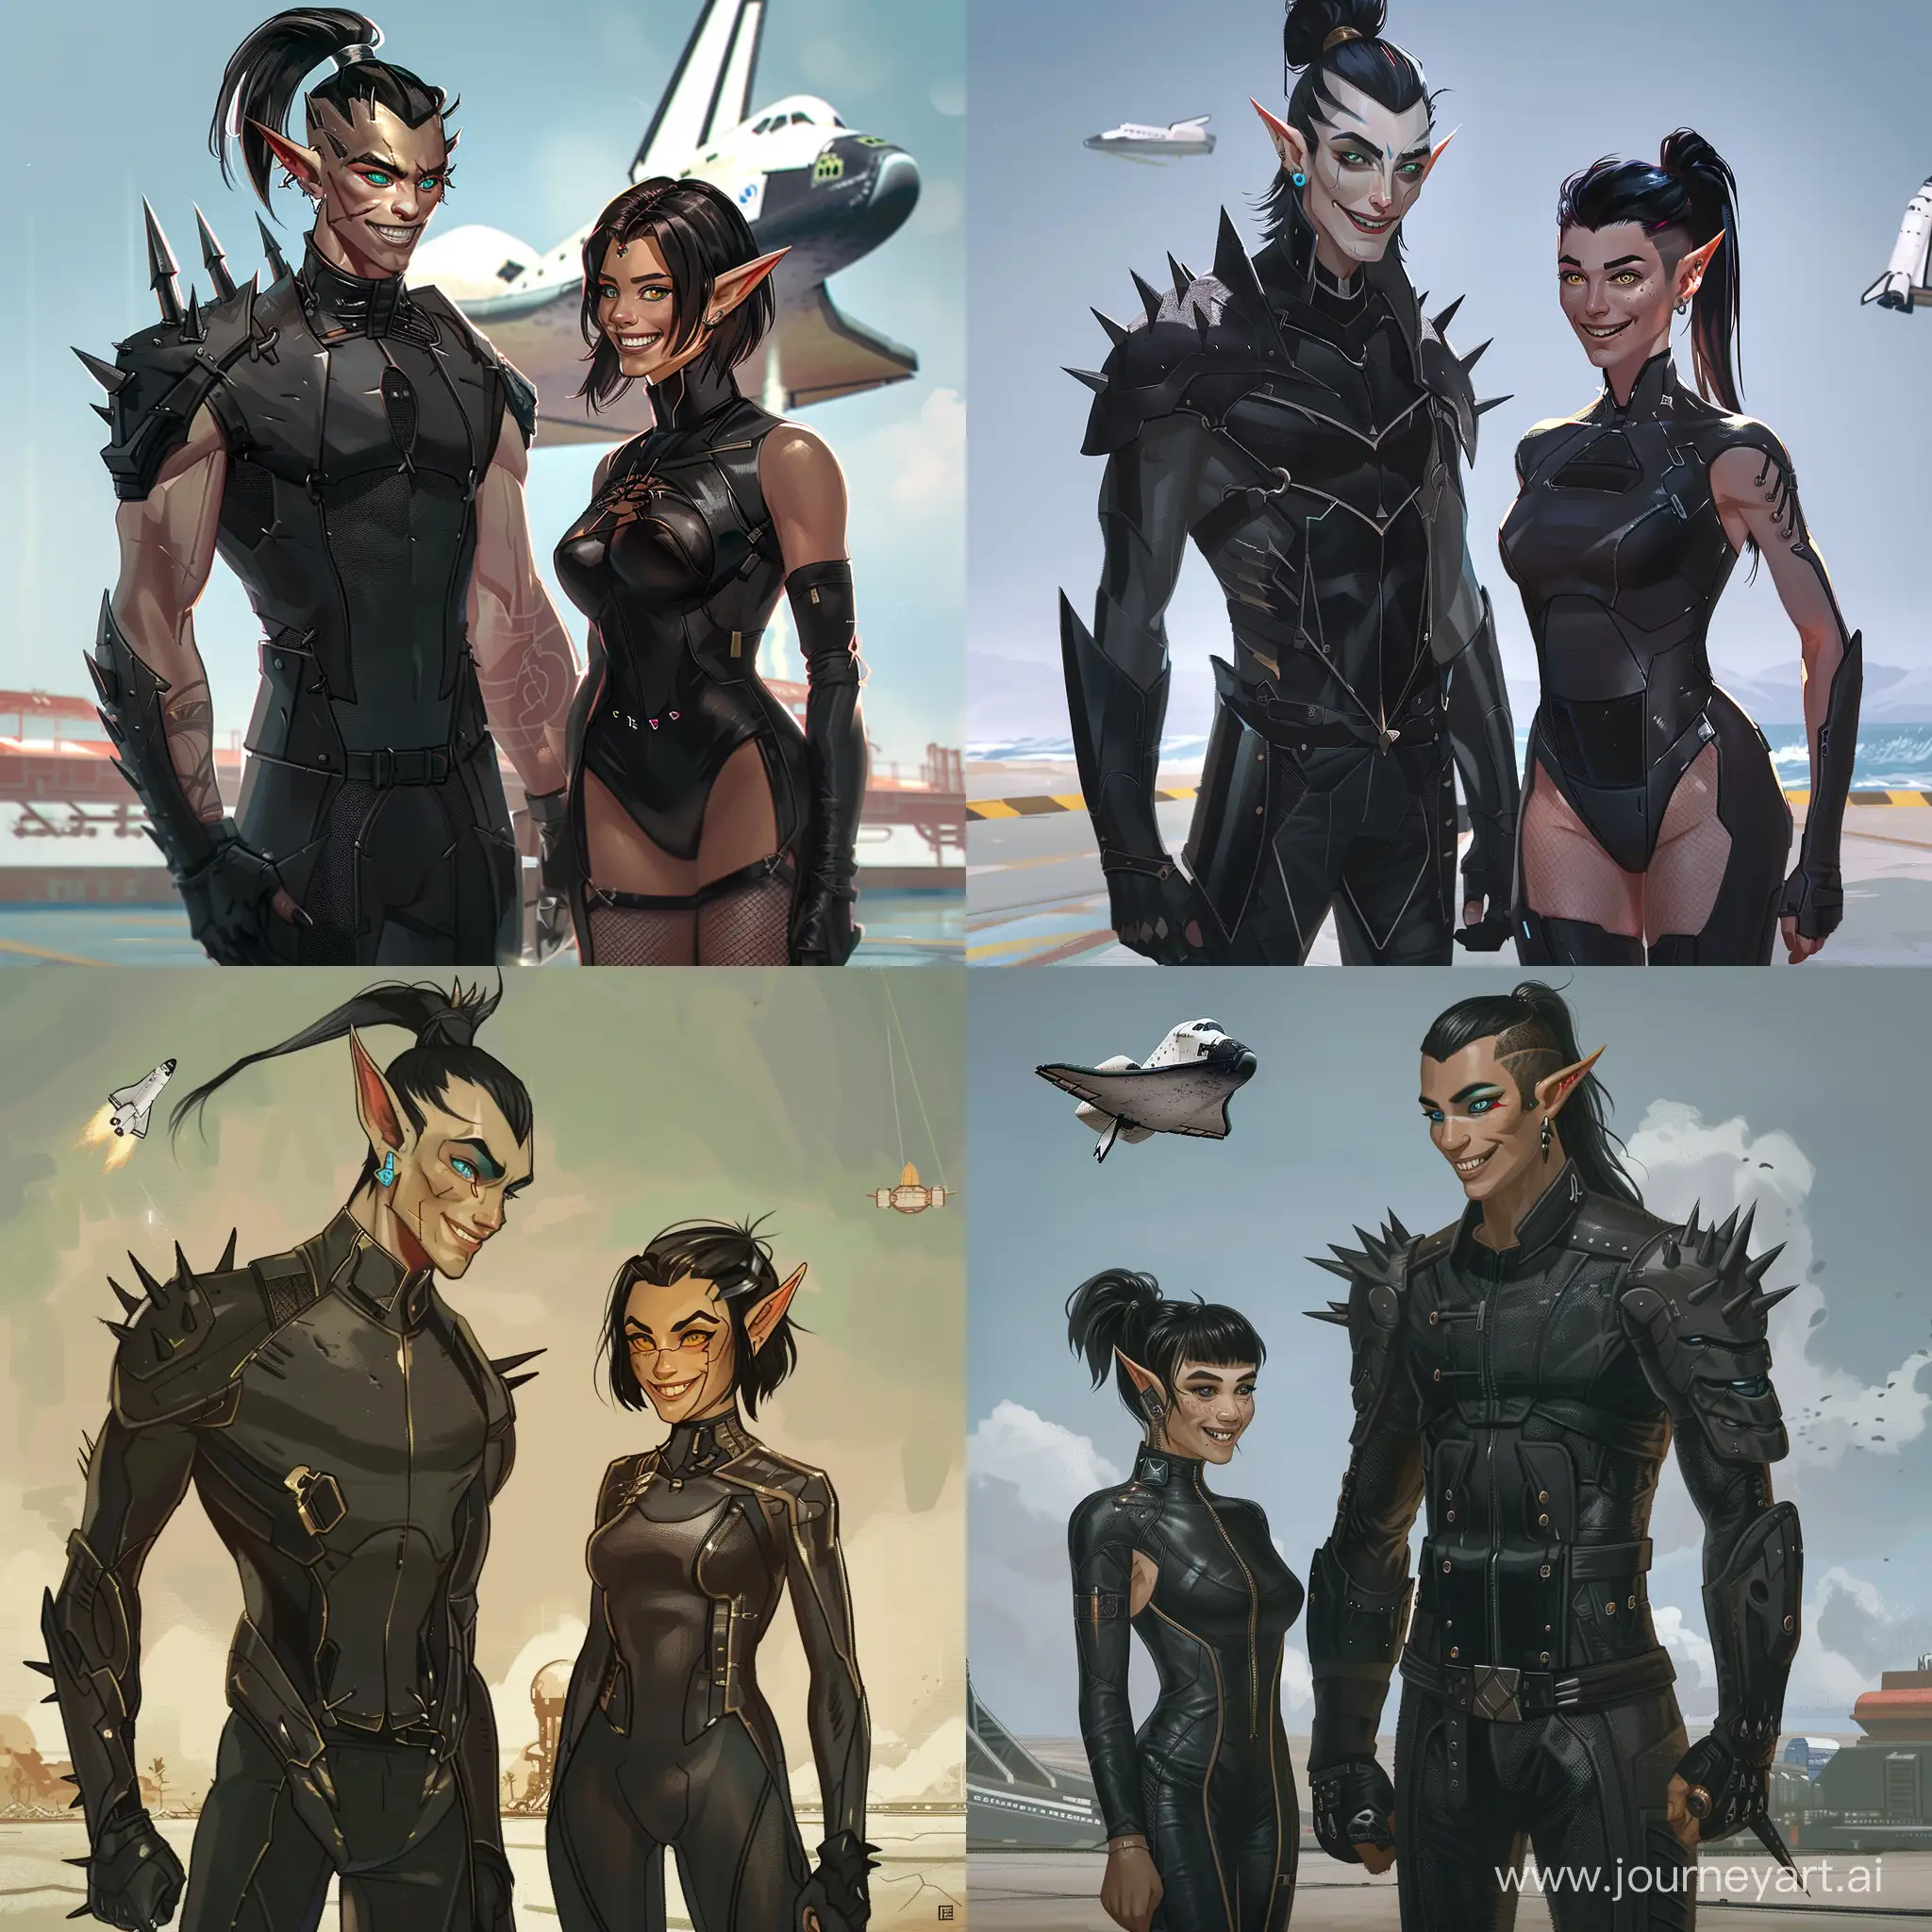 Futuristic-Elven-Warrior-and-Human-Assassin-at-Space-Shuttle-Landing-Zone